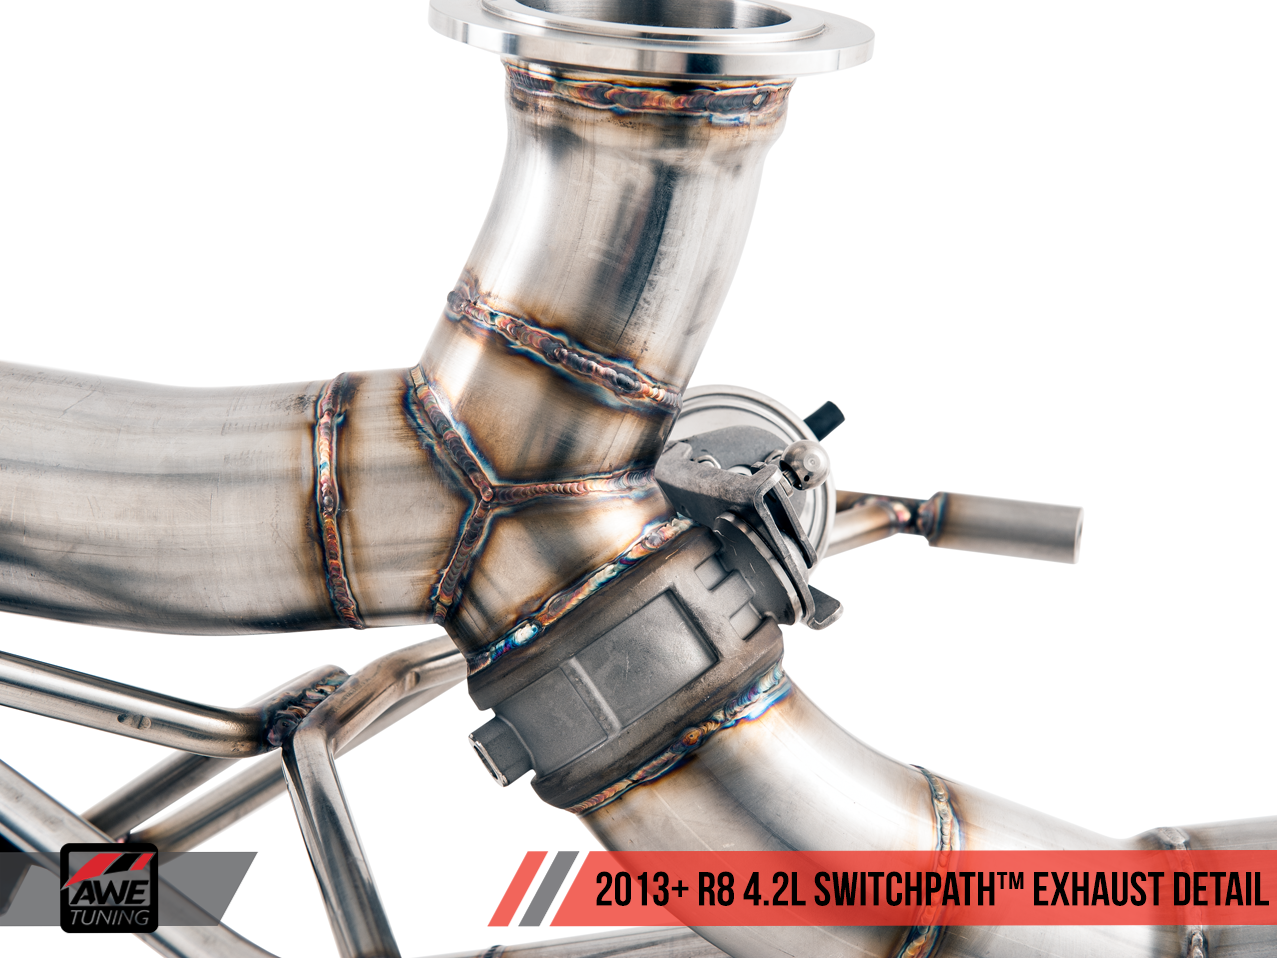 AWE SwitchPath™ Exhaust for Audi R8 4.2L Spyder (2014-15) - Motorsports LA